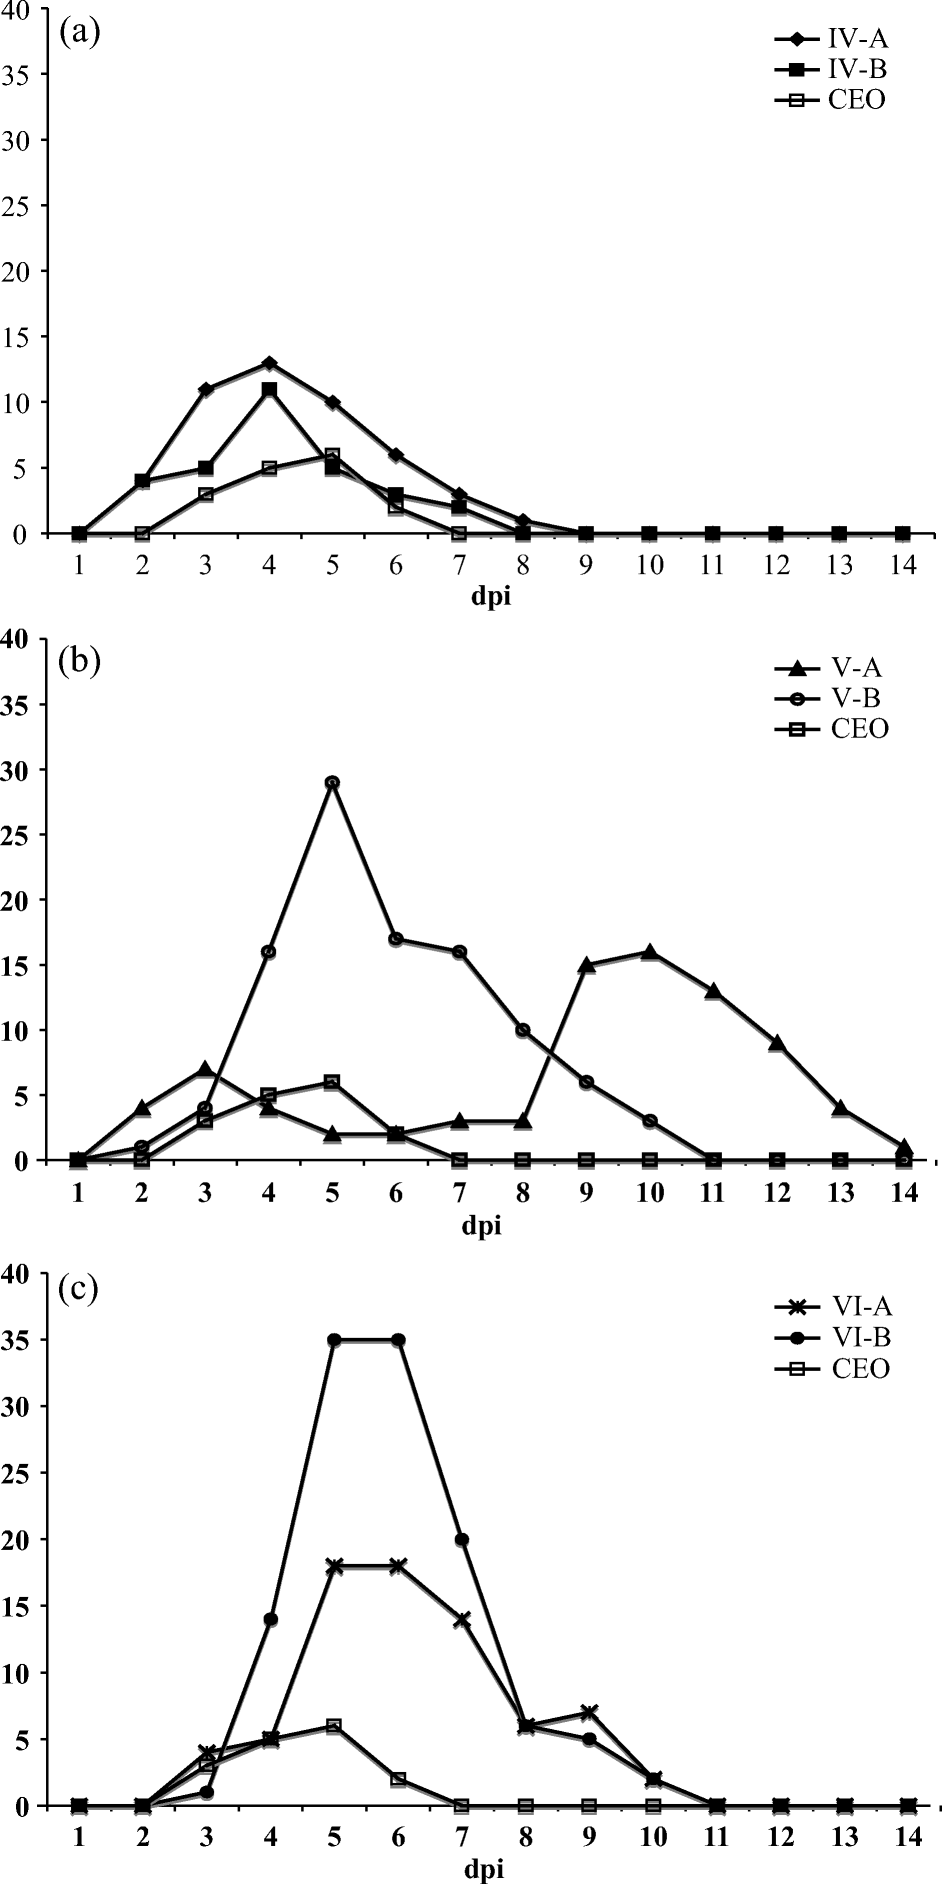 Figure 1.  Total clinical sign scores recorded daily for chickens infected with (1a) isolates IV-A and IV-B, (1b) isolates V-A and V-B, and (1c) isolates VI-A and VI-B as compared with clinical signs induced by the CEO vaccine.